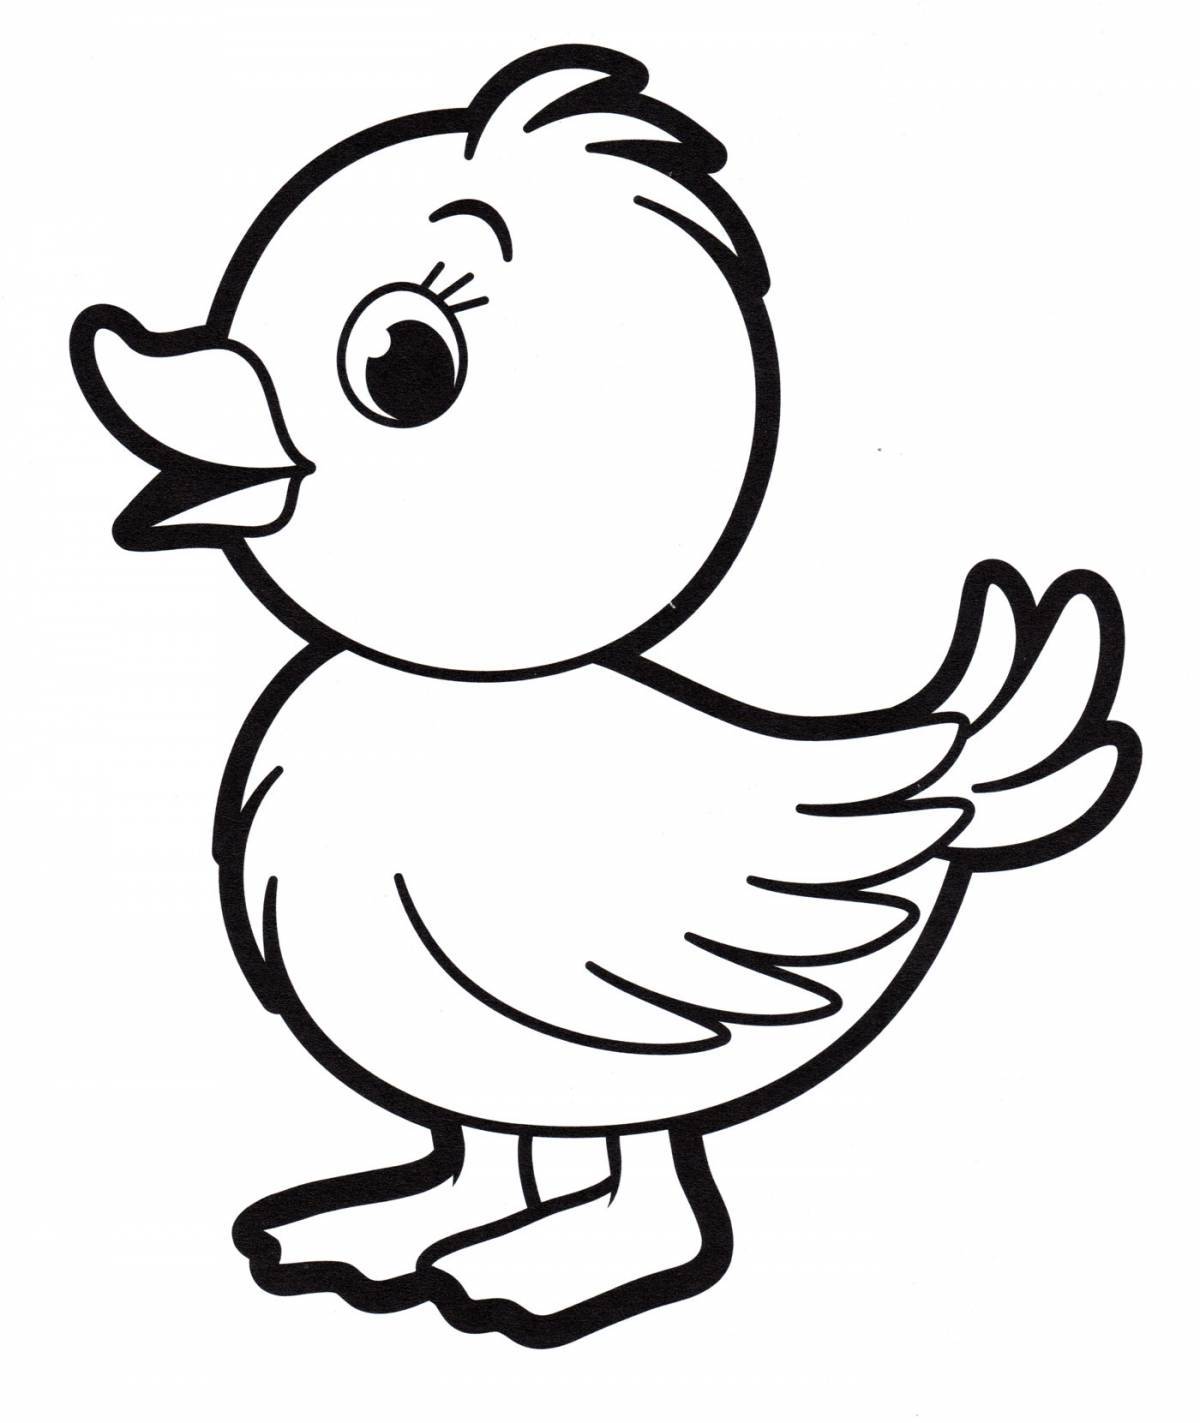 Chicken coloring page for children 2-3 years old